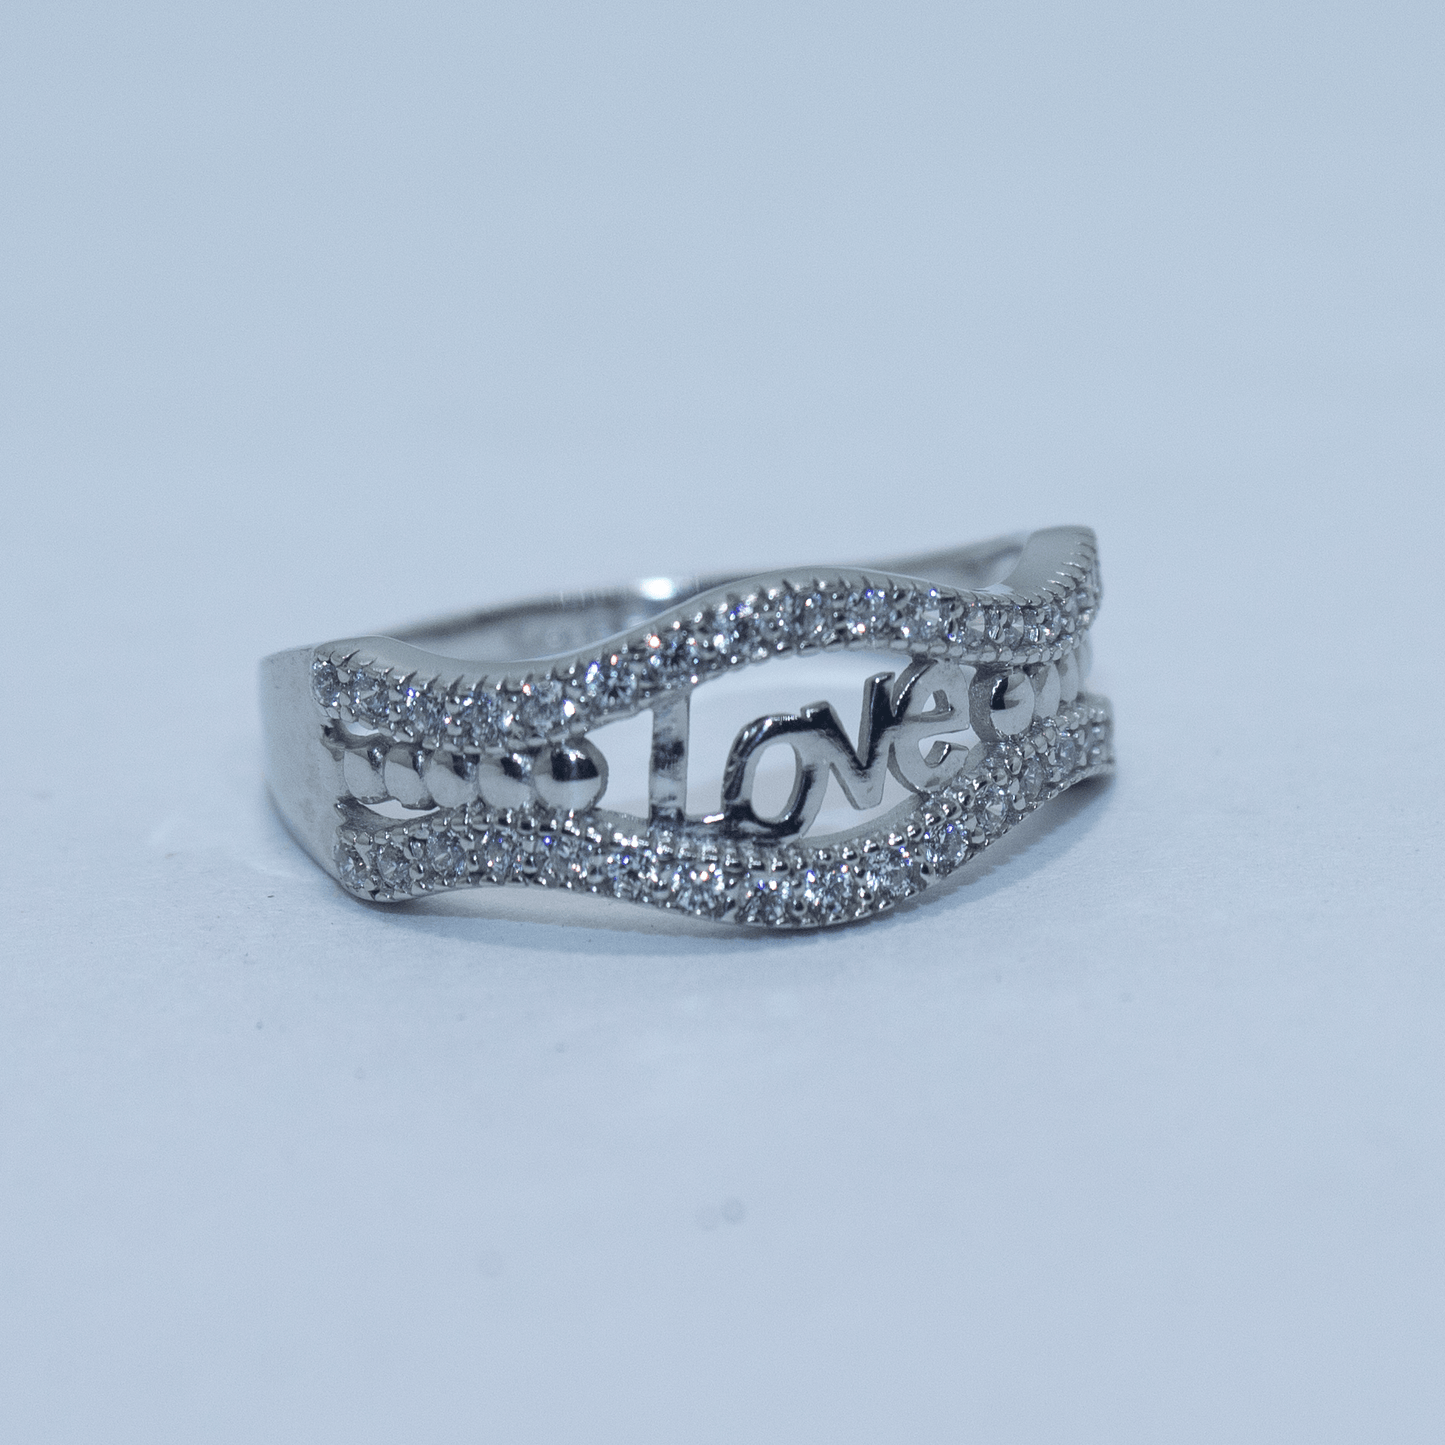 Jewel Cosmos's Pure 925 Real Silver Love Ring With Jarkan Stones